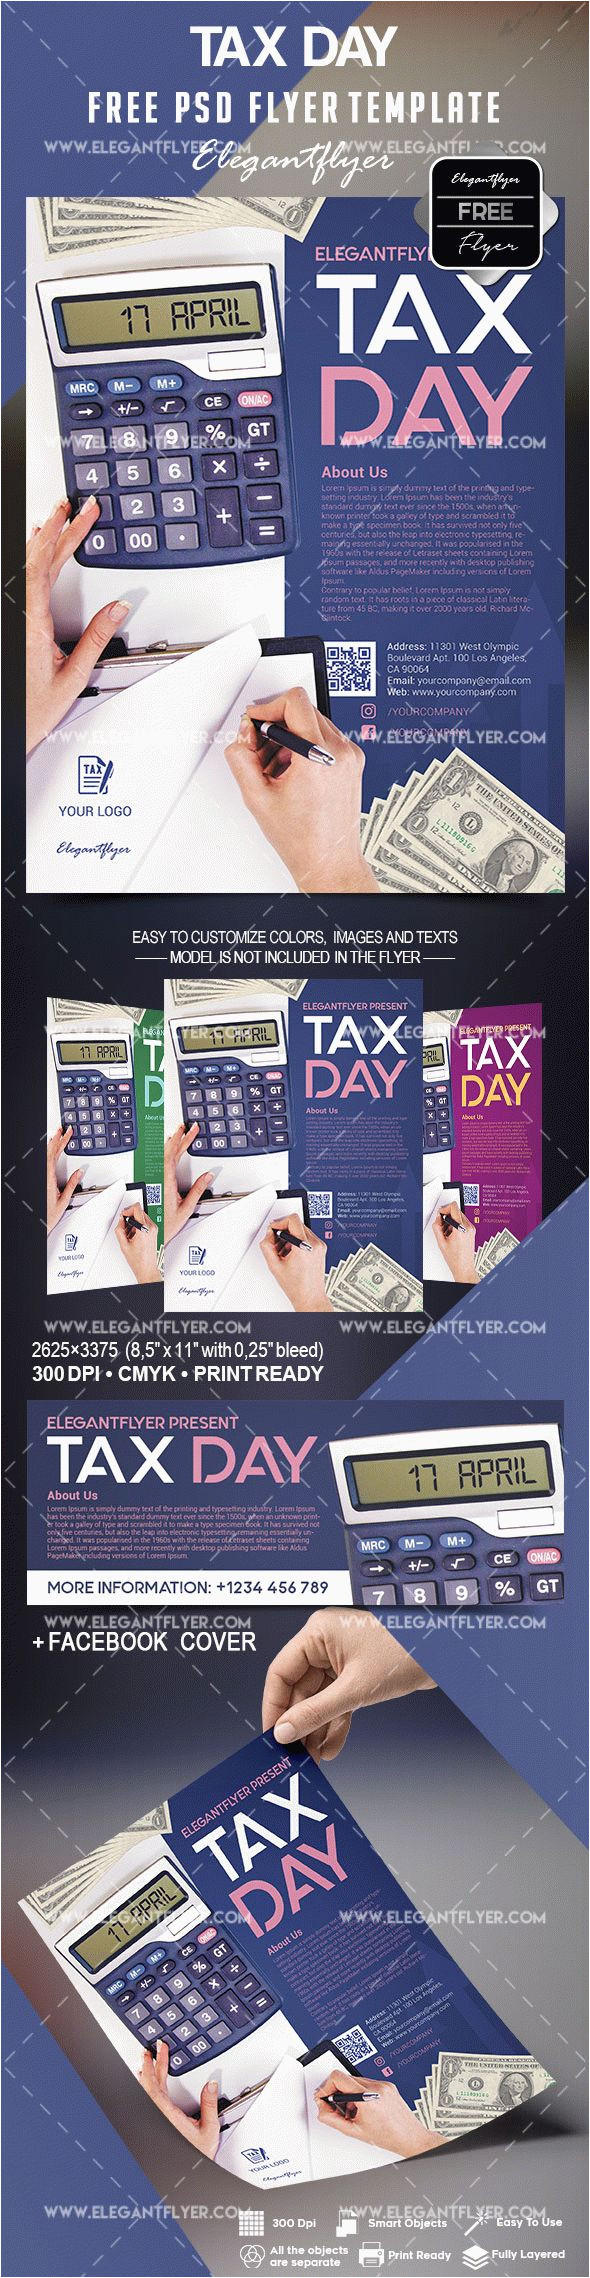 free tax day flyer template